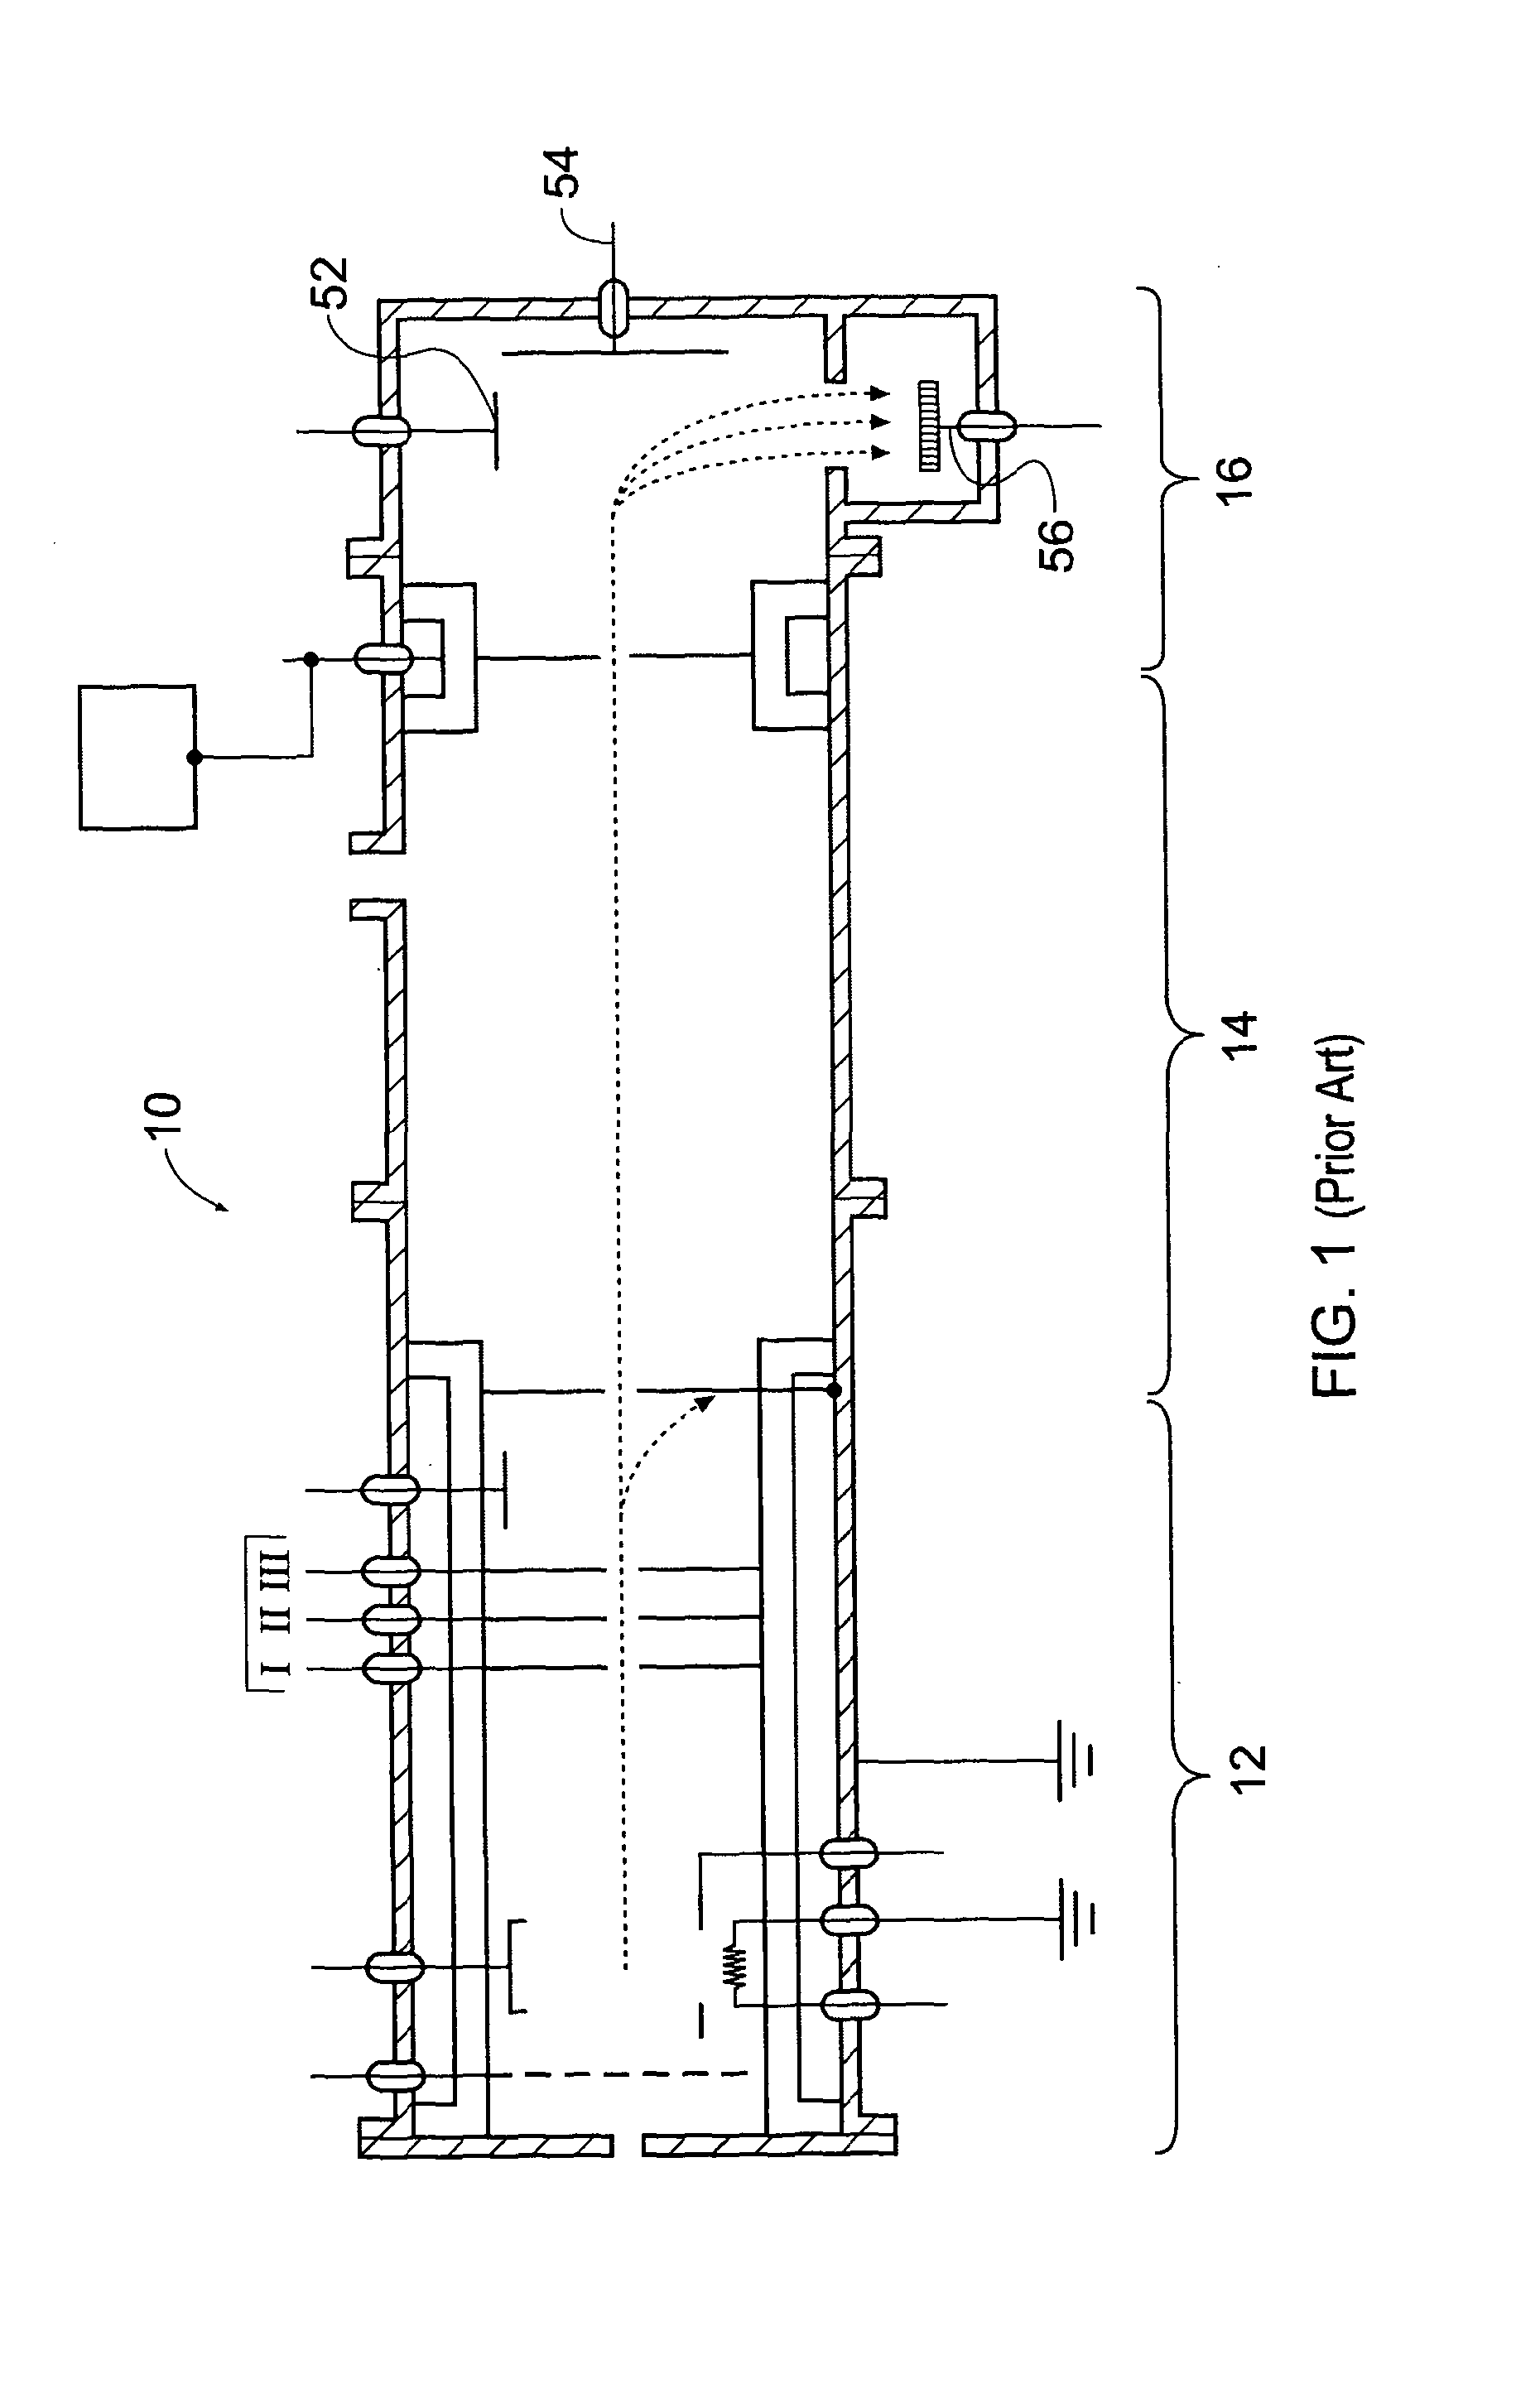 Mass spectrometers and methods of ion separation and detection